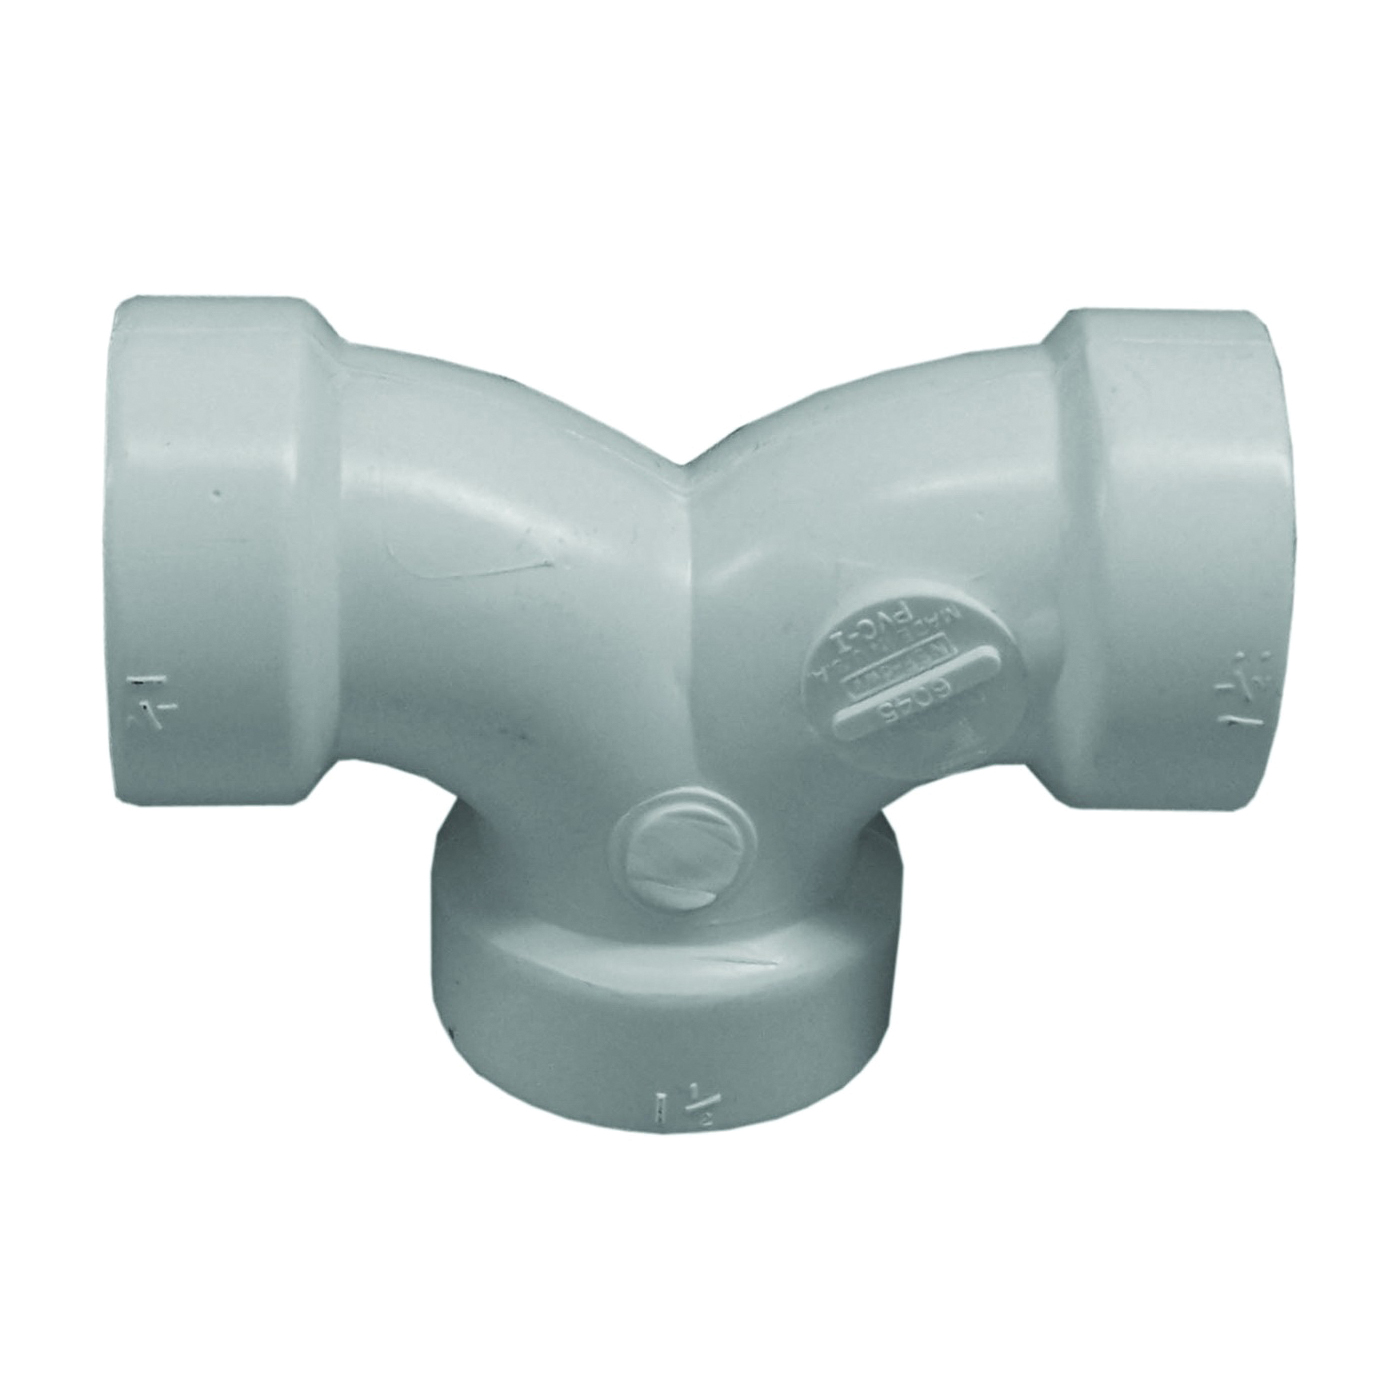 700 Series 70716 Double Pipe Elbow, 1-1/2 in, Hub, 90 deg Angle, PVC, SCH 40 Schedule